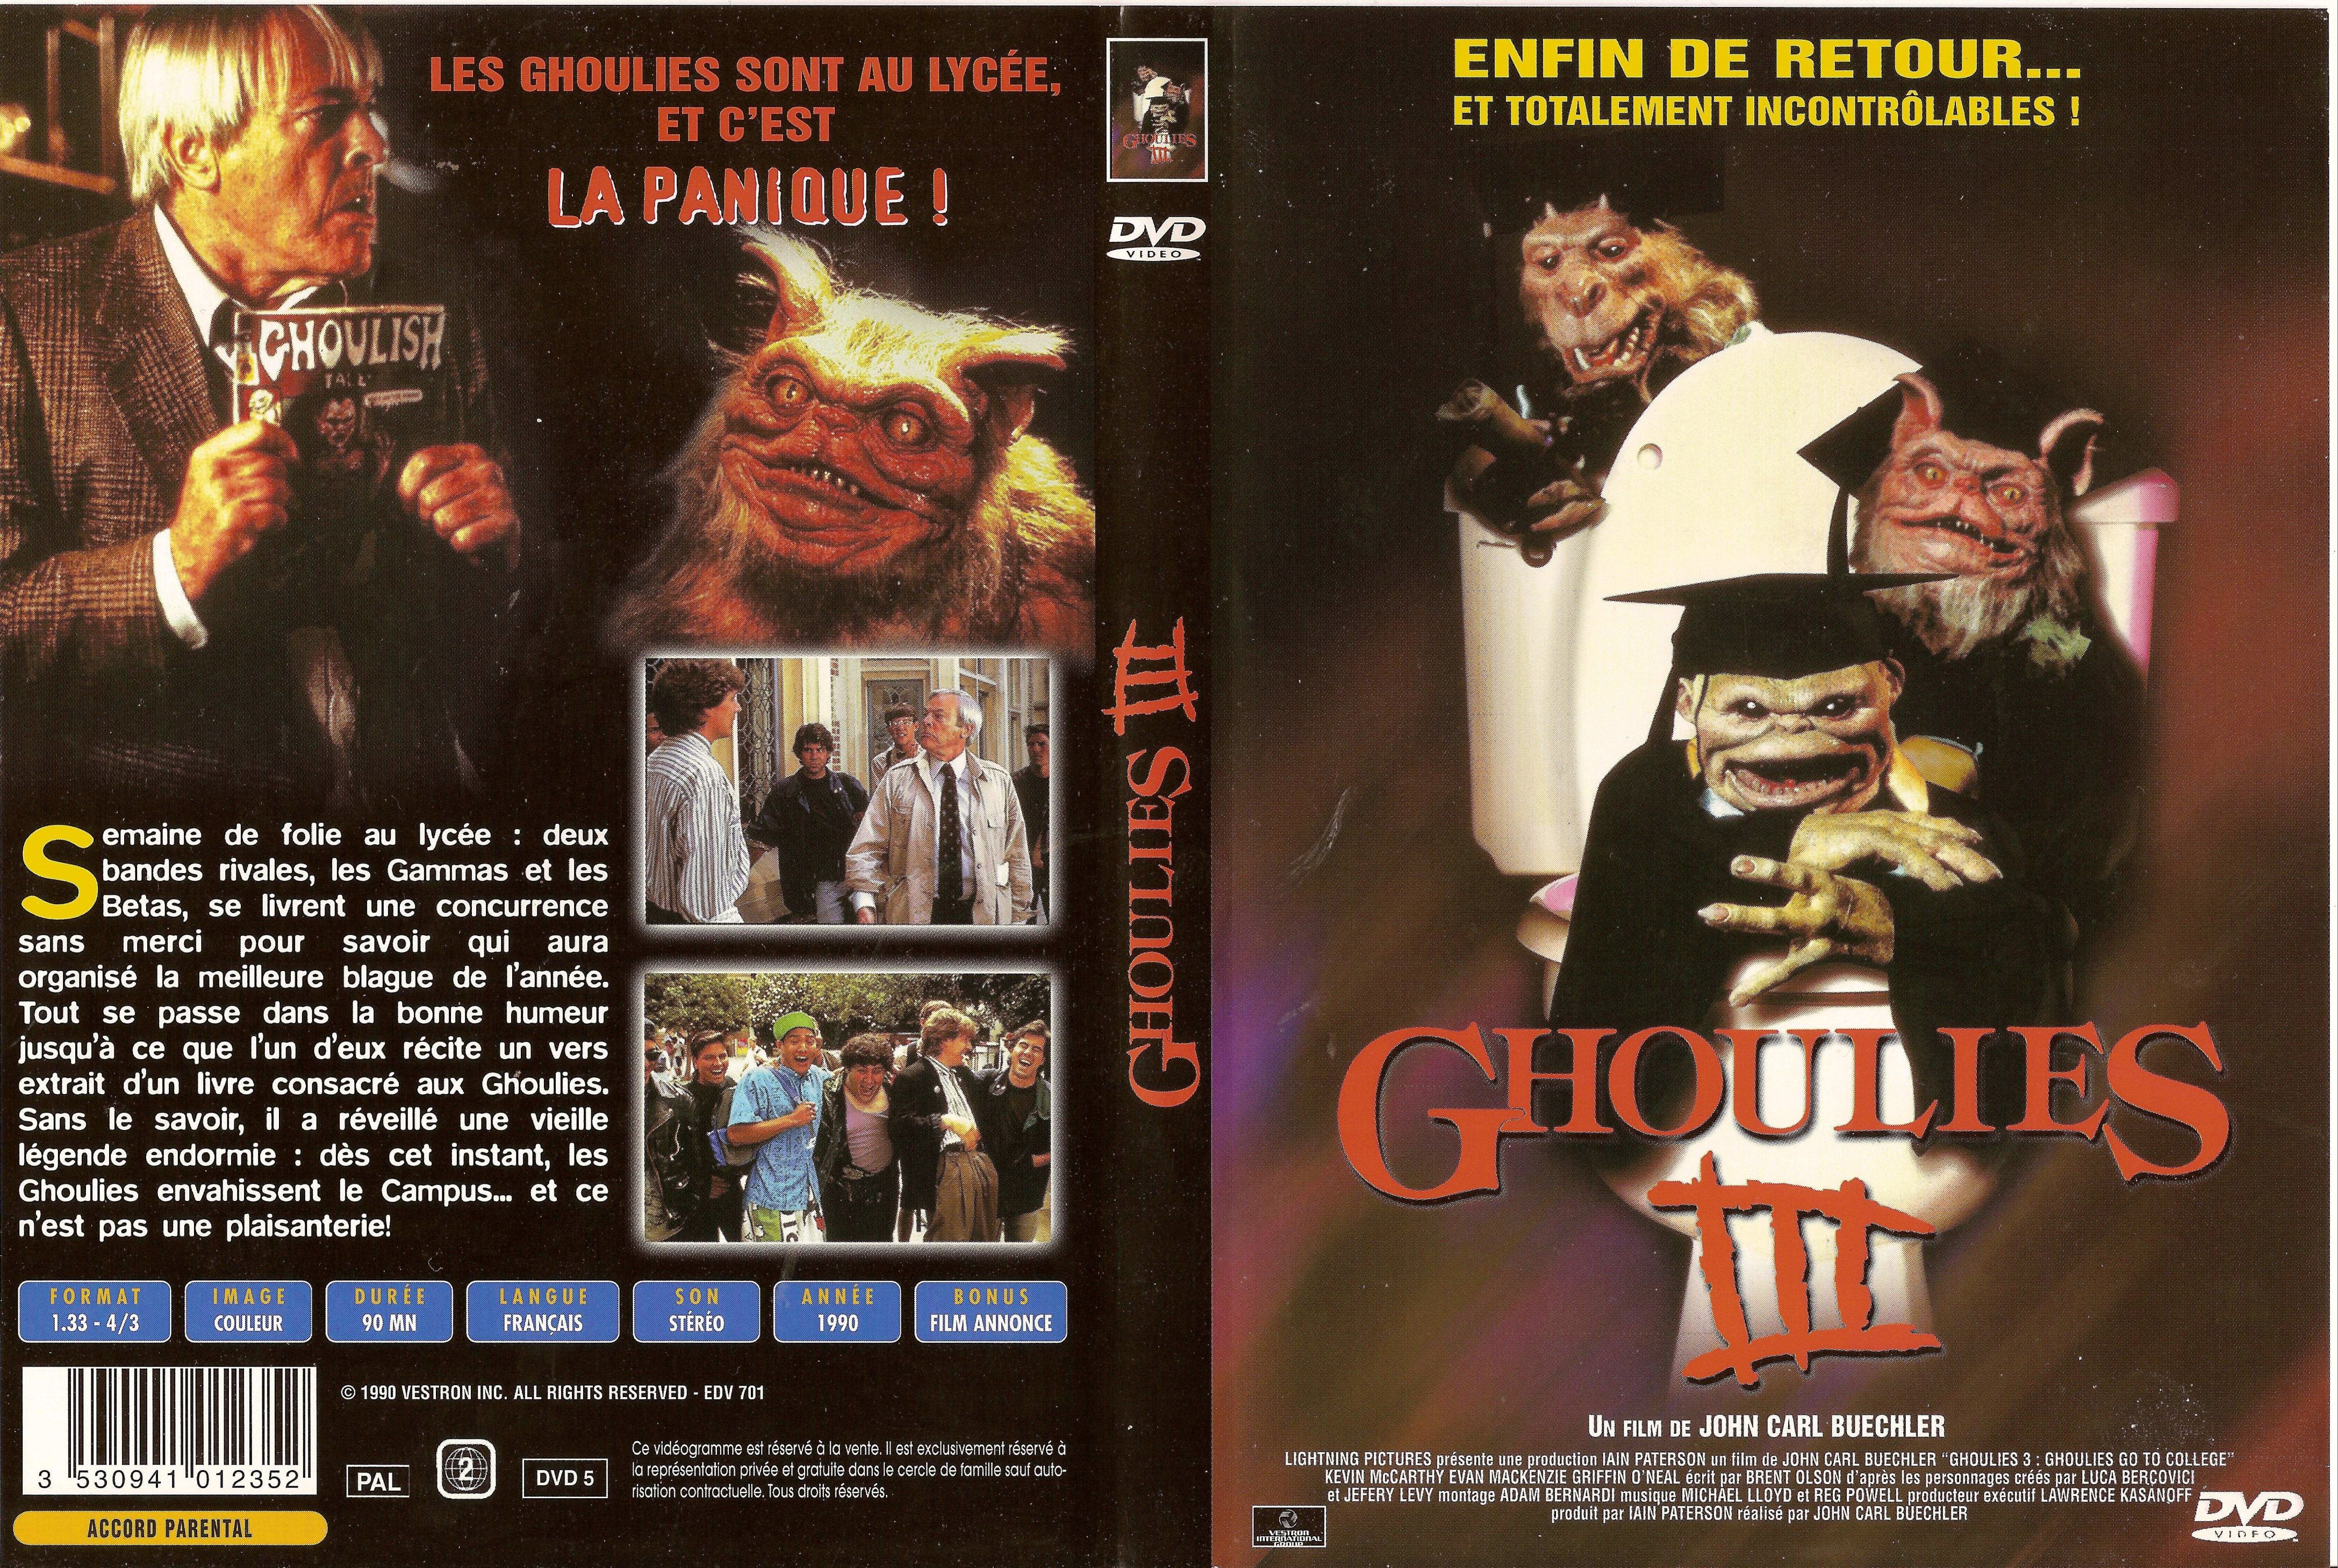 Jaquette DVD Ghoulies 3